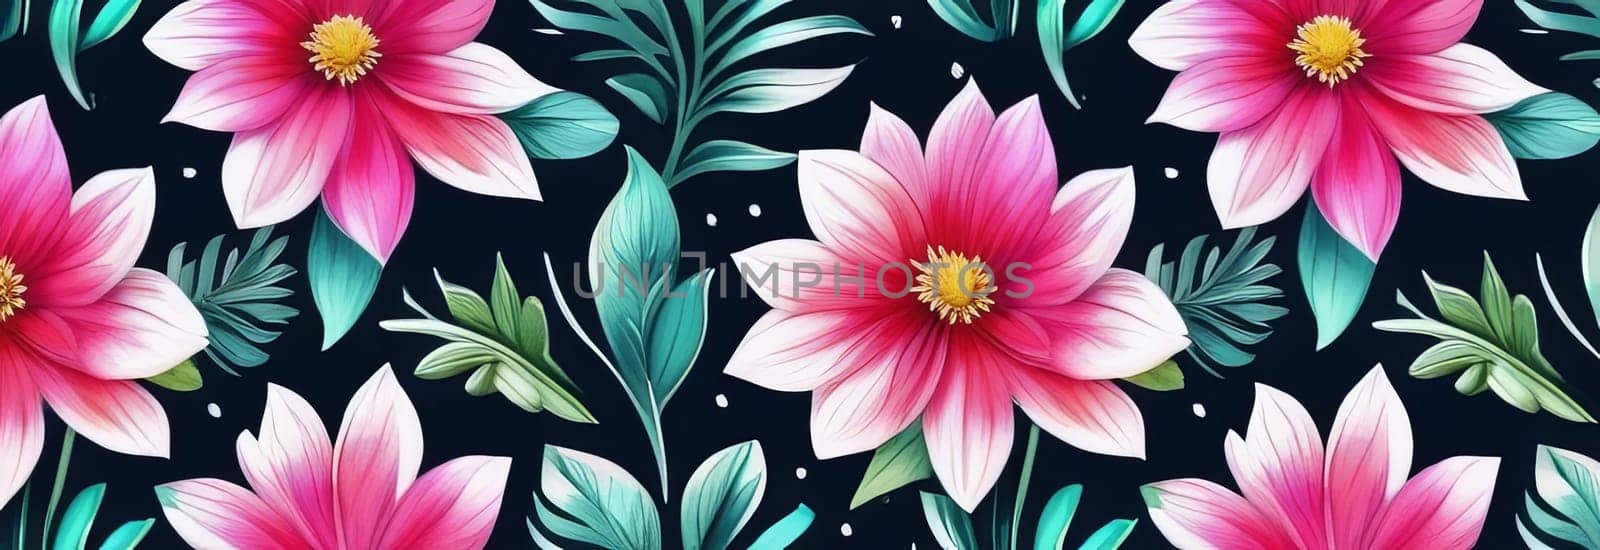 Vibrant, intricate floral design set against dark background, creating visually appealing contrast between colorful flowers, dark backdrop. For website design, advertising, greeting cards, magazines. by Angelsmoon